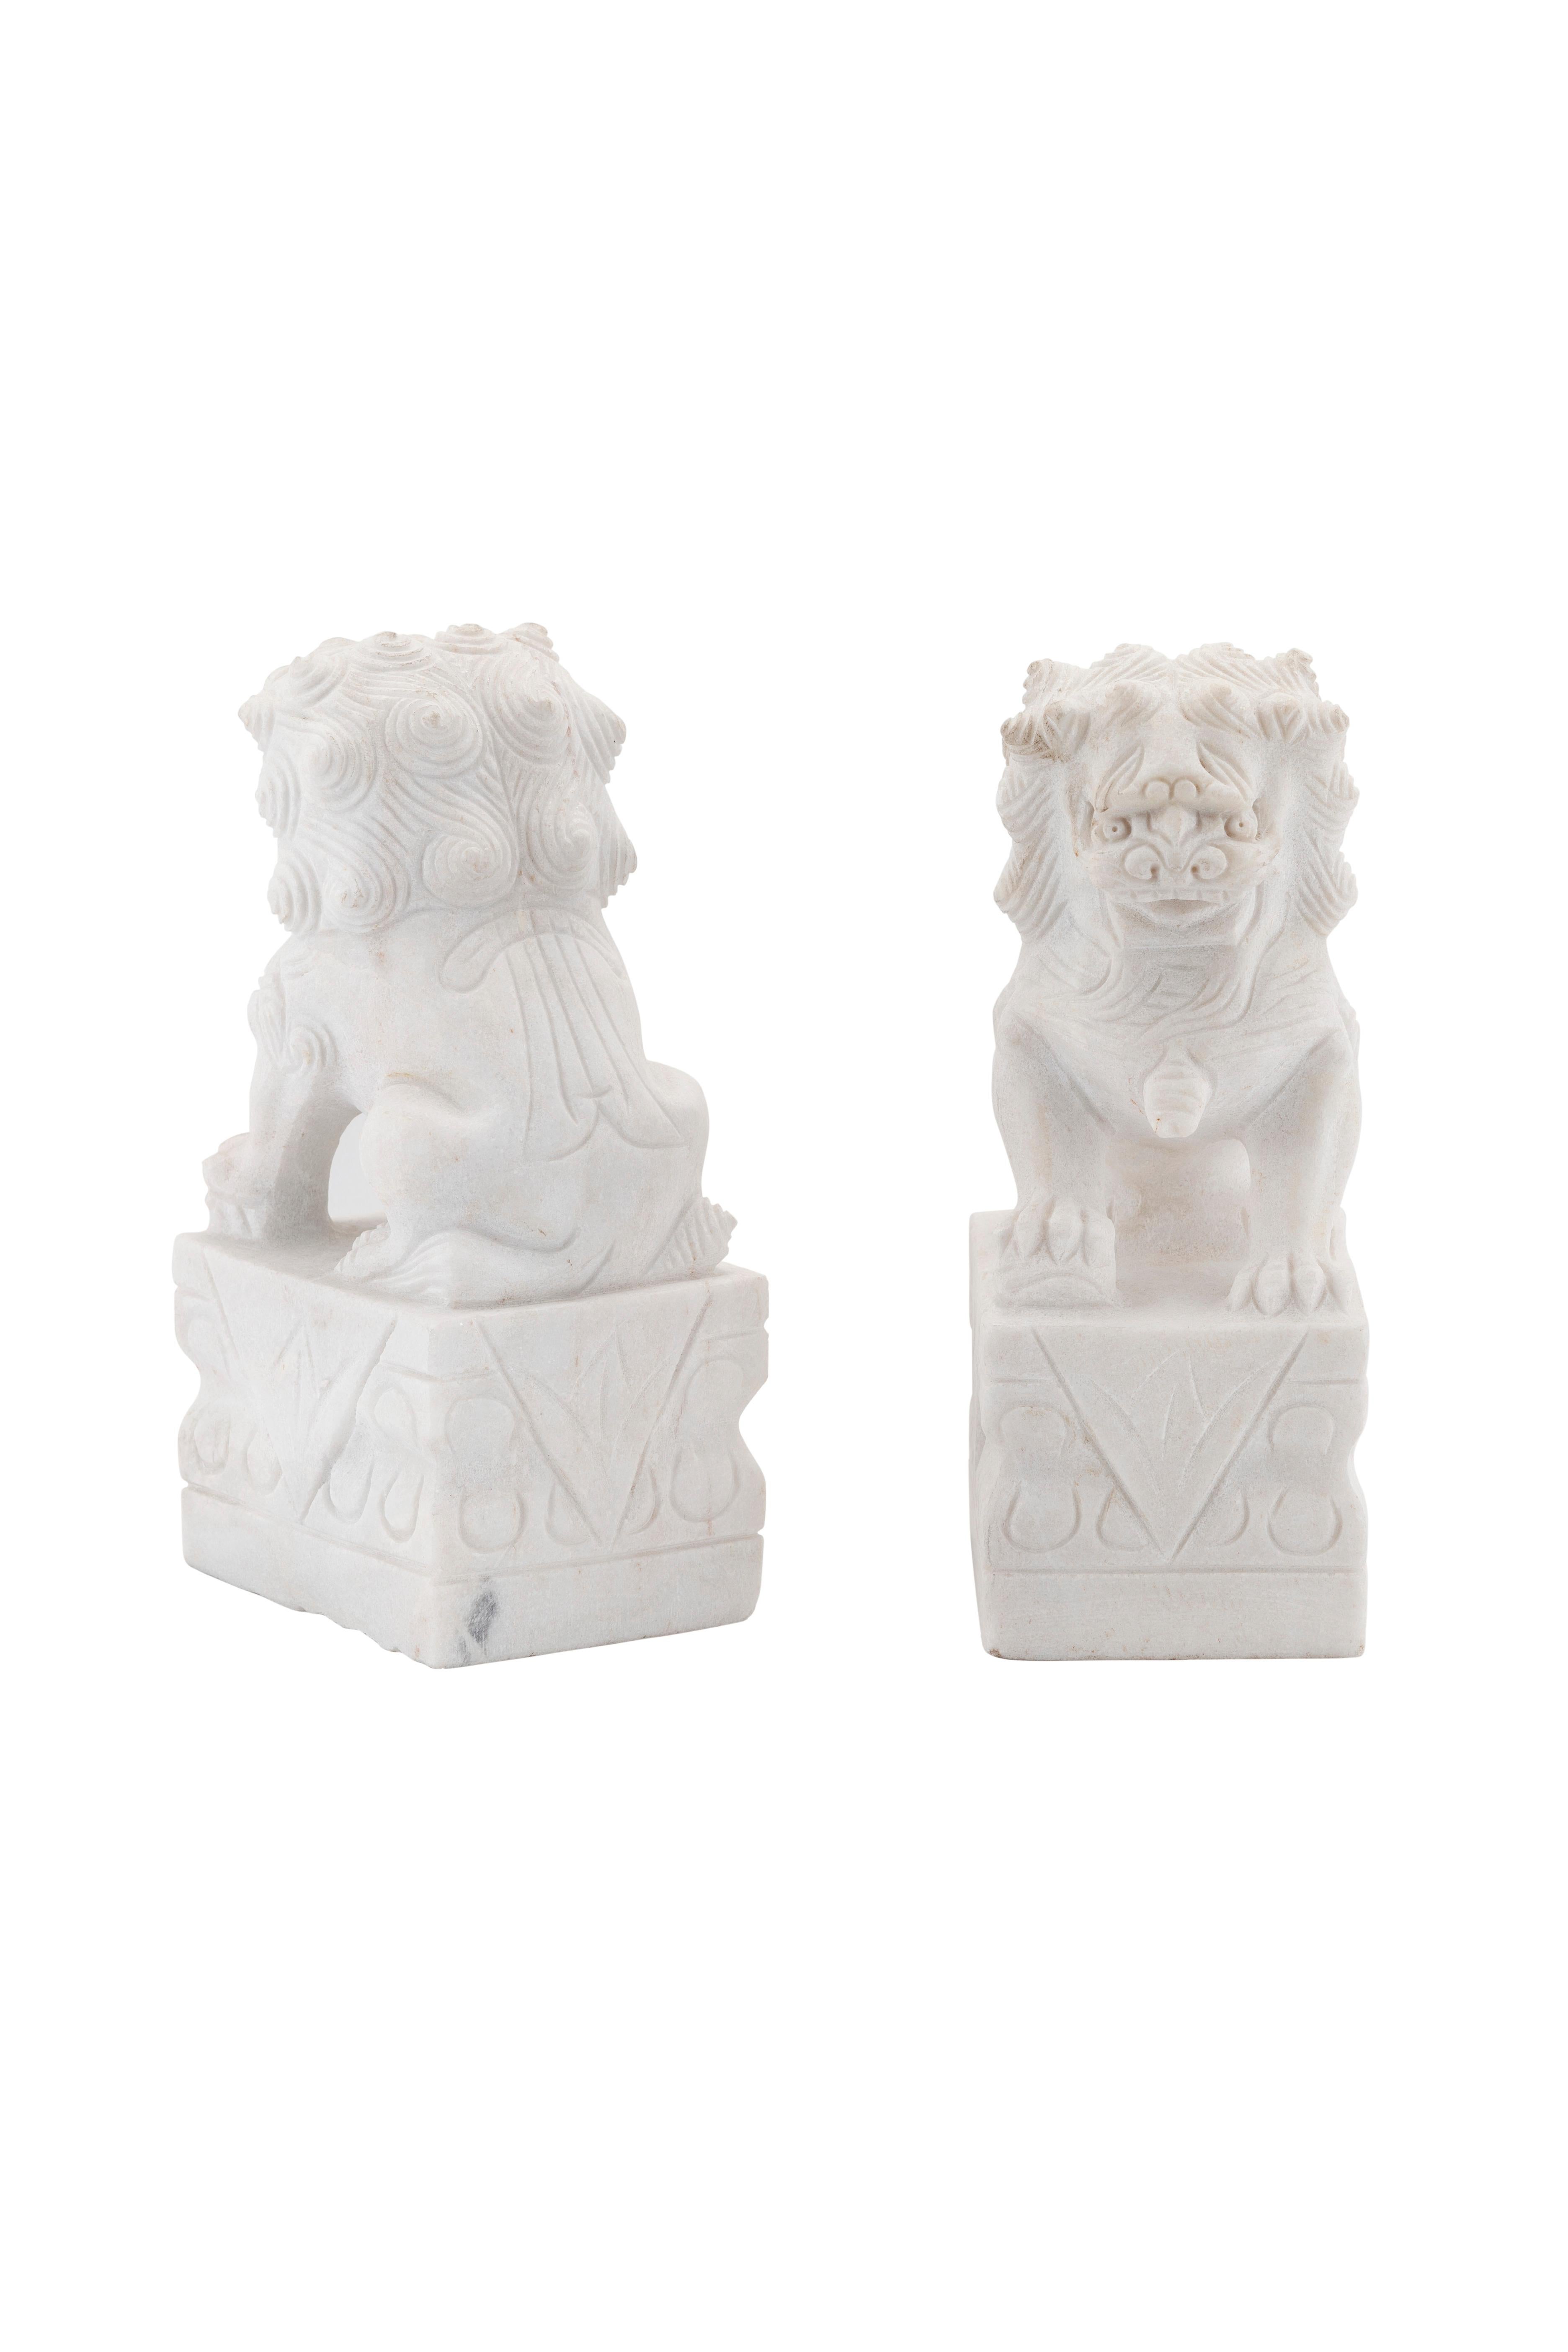 Portuguese Set/2 Lions, Calacatta Bianco Marble, Handmade by Lusitanus Home For Sale